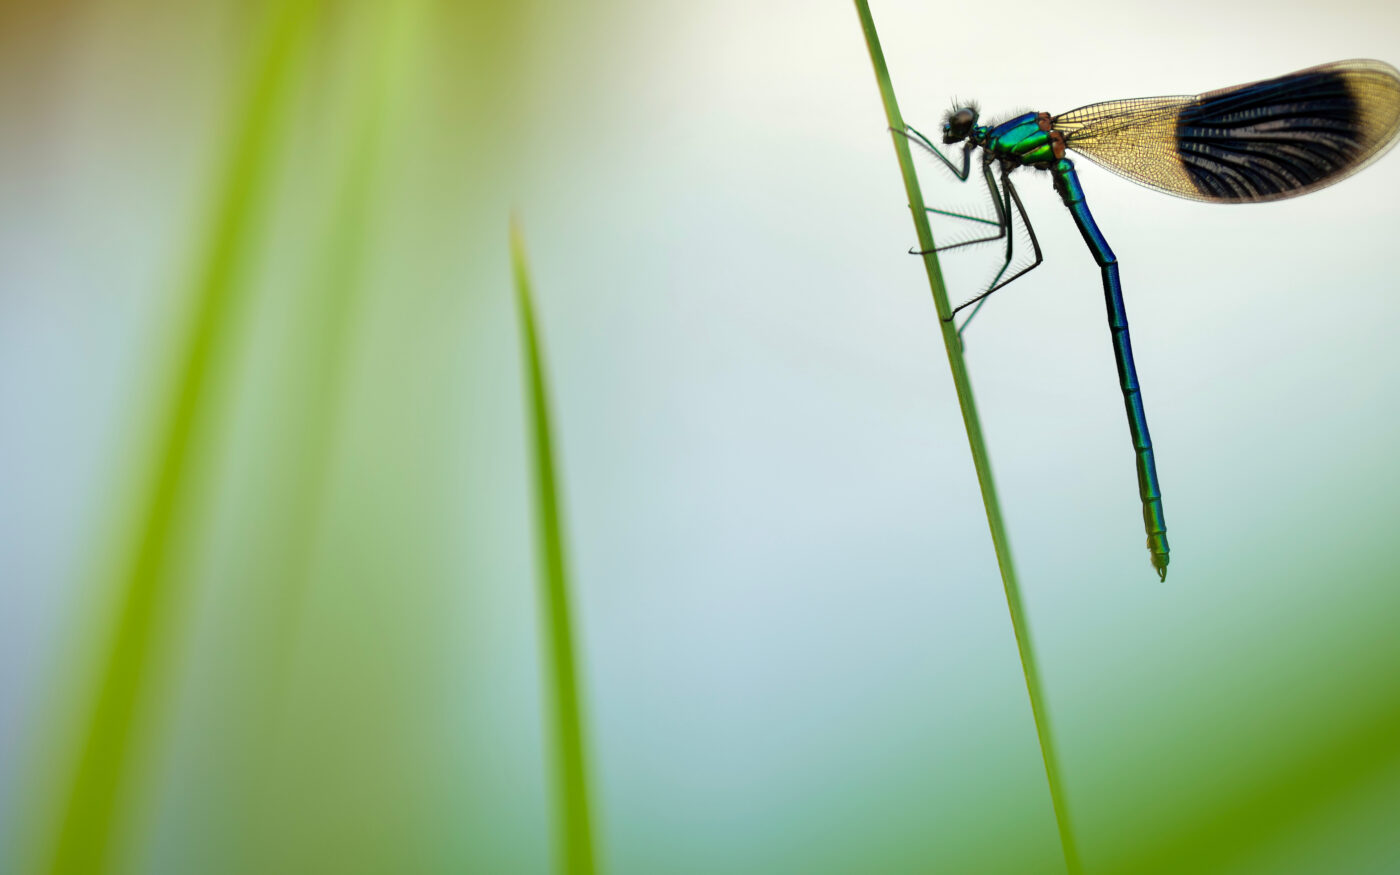 I was able to find many of these gorgeous banded demoiselle by a river near my home in Gävle, Sweden. With the help of the nearby blades of grass I could create foreground and background elements in order to create depth in the image.